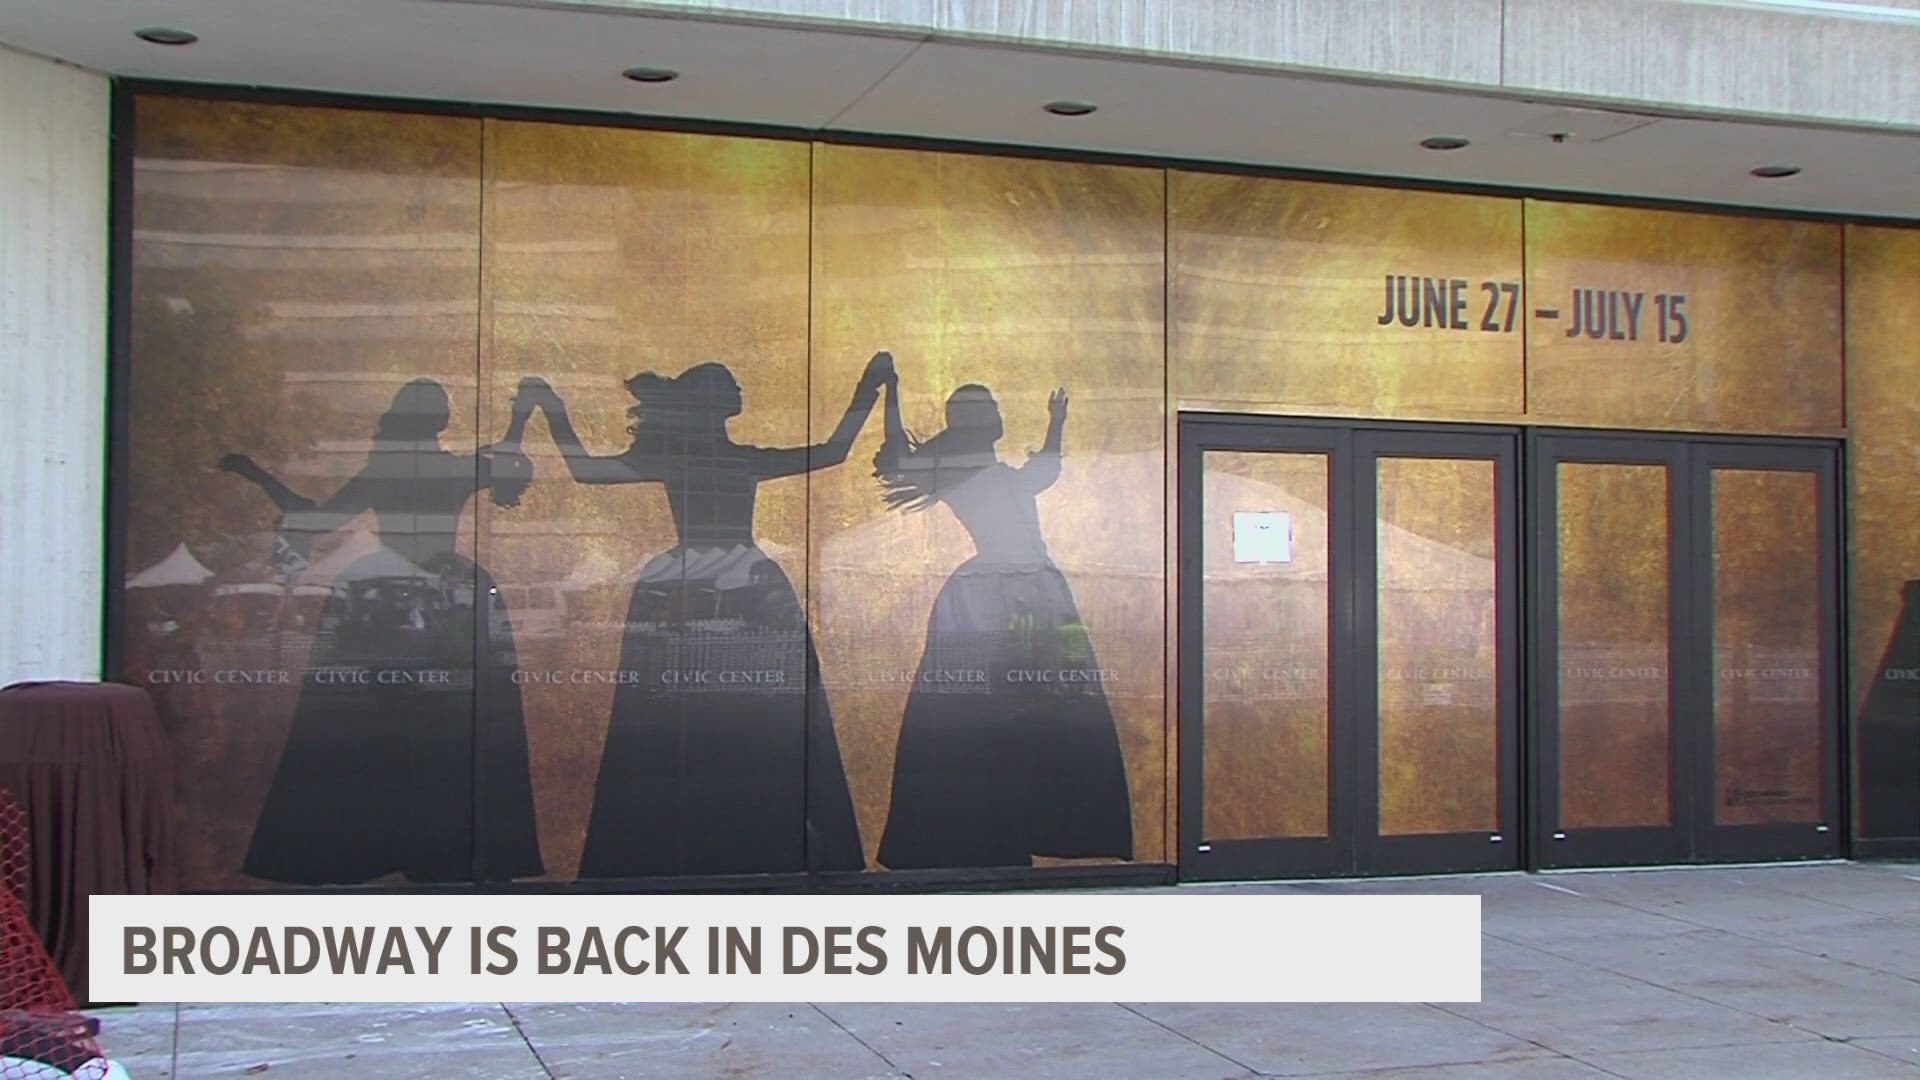 Des Moines Performing Arts announced rescheduled show dates from its 2019-20 and 2020-21 calendars.